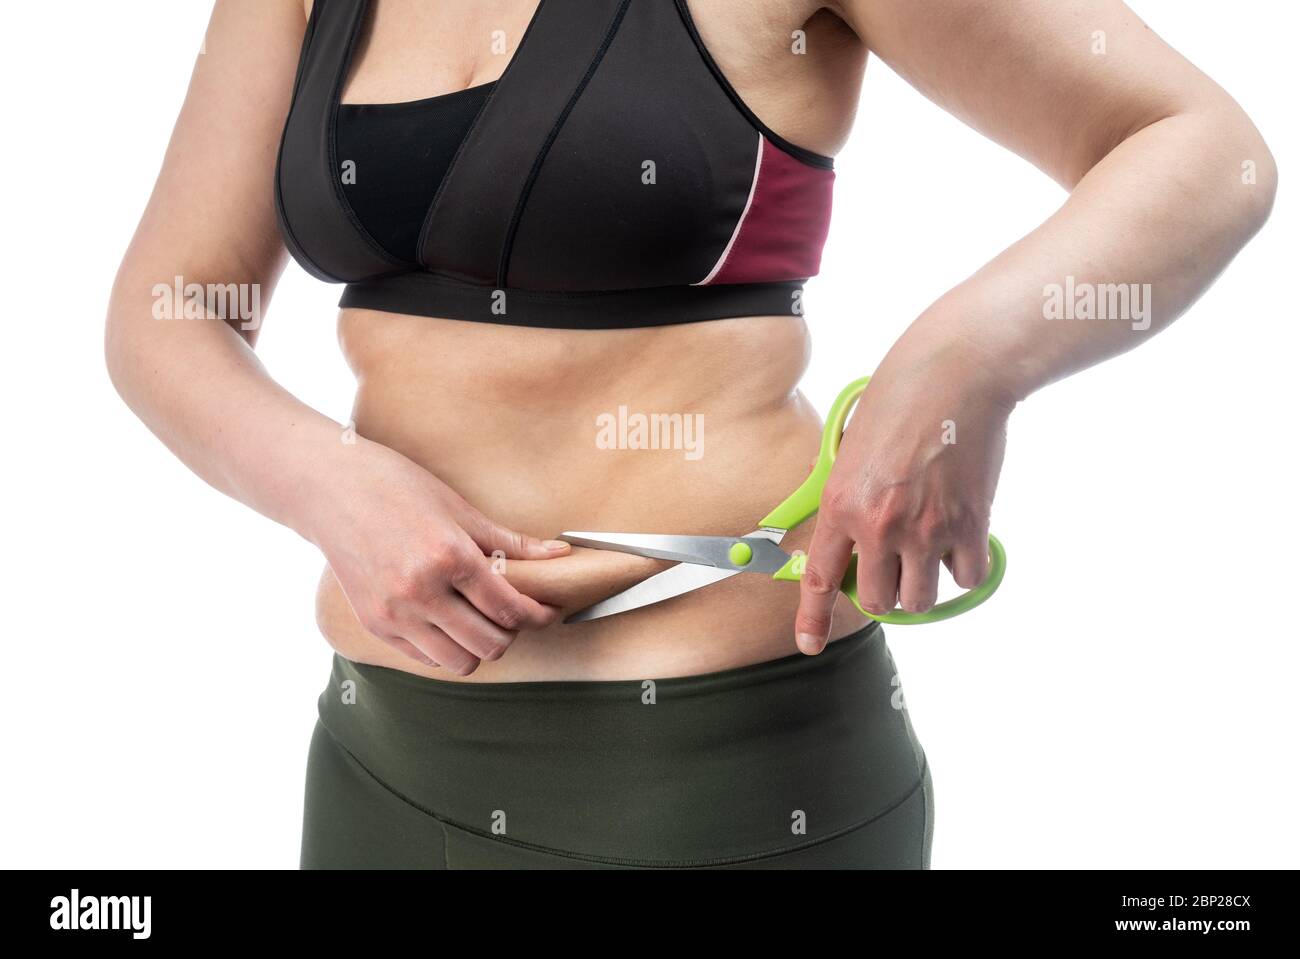 Middle-aged woman with obesity and saggy skin of the abdomen, on a white background, close-up. Scissors as a symbol of surgical retraction. Stock Photo